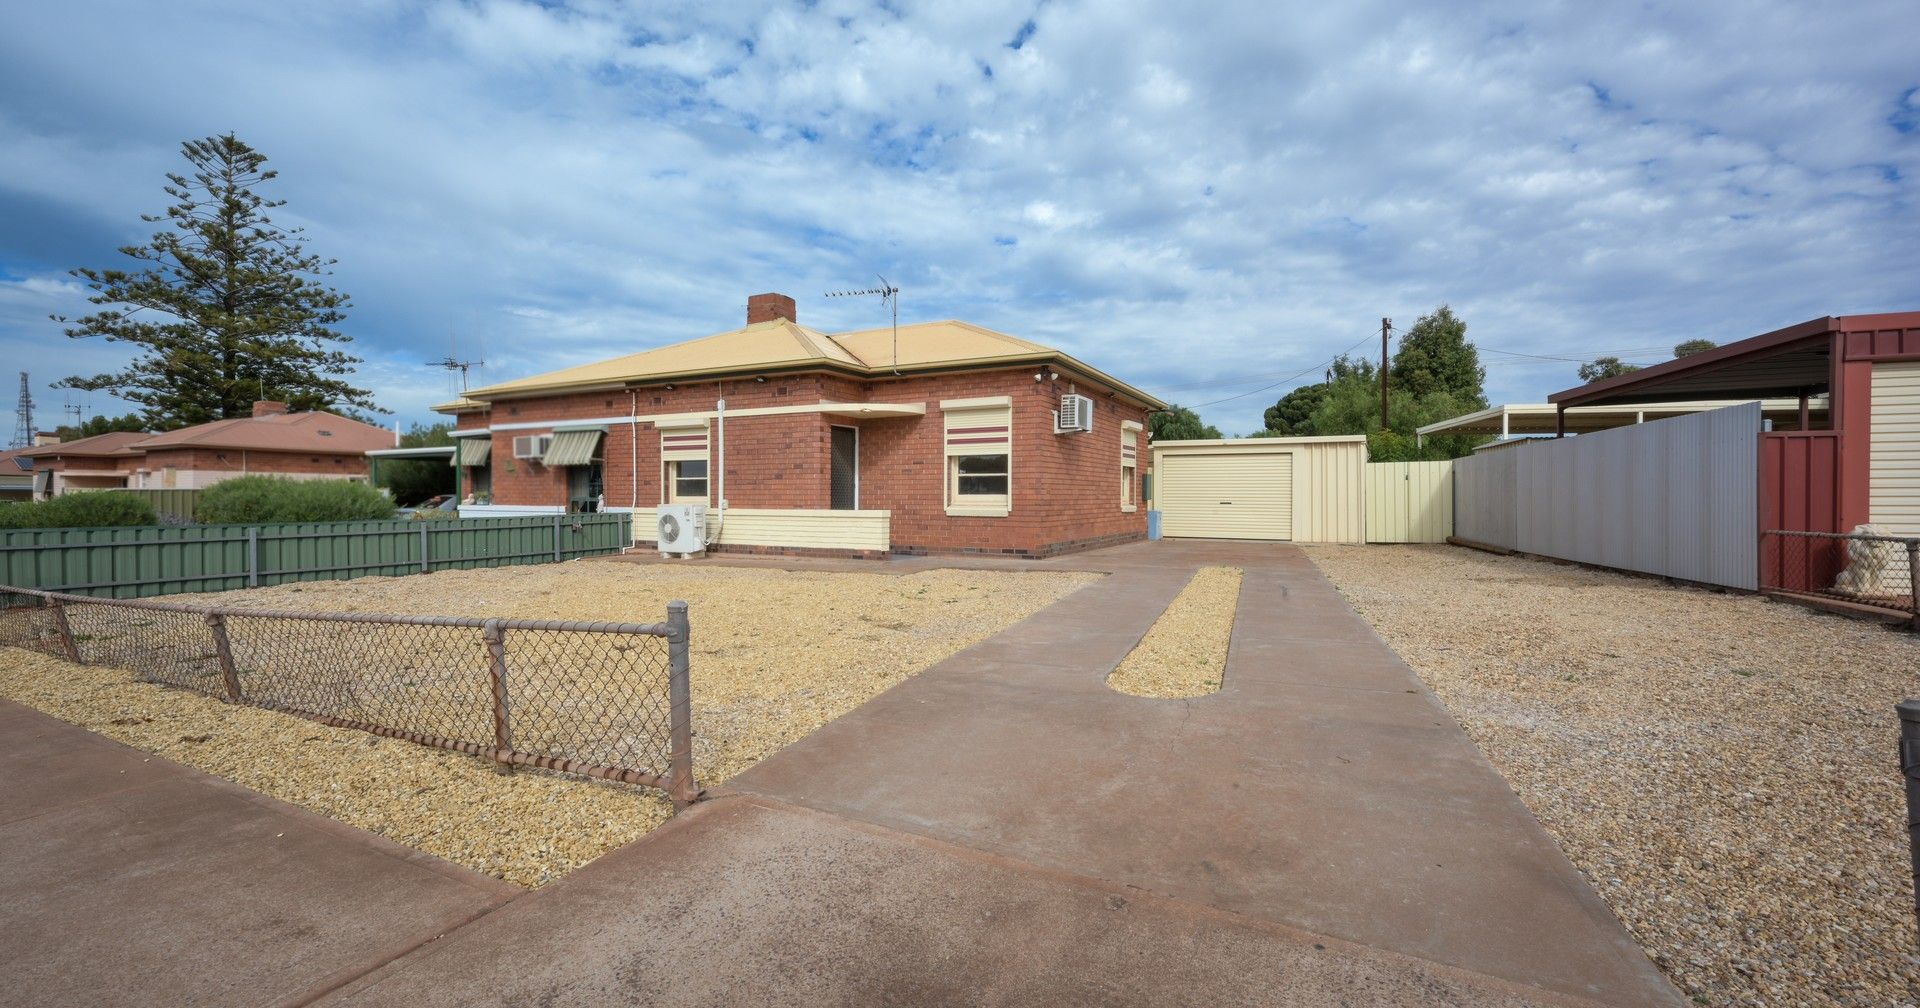 199 Mcbryde Terrace, Whyalla Playford SA 5600, Image 1